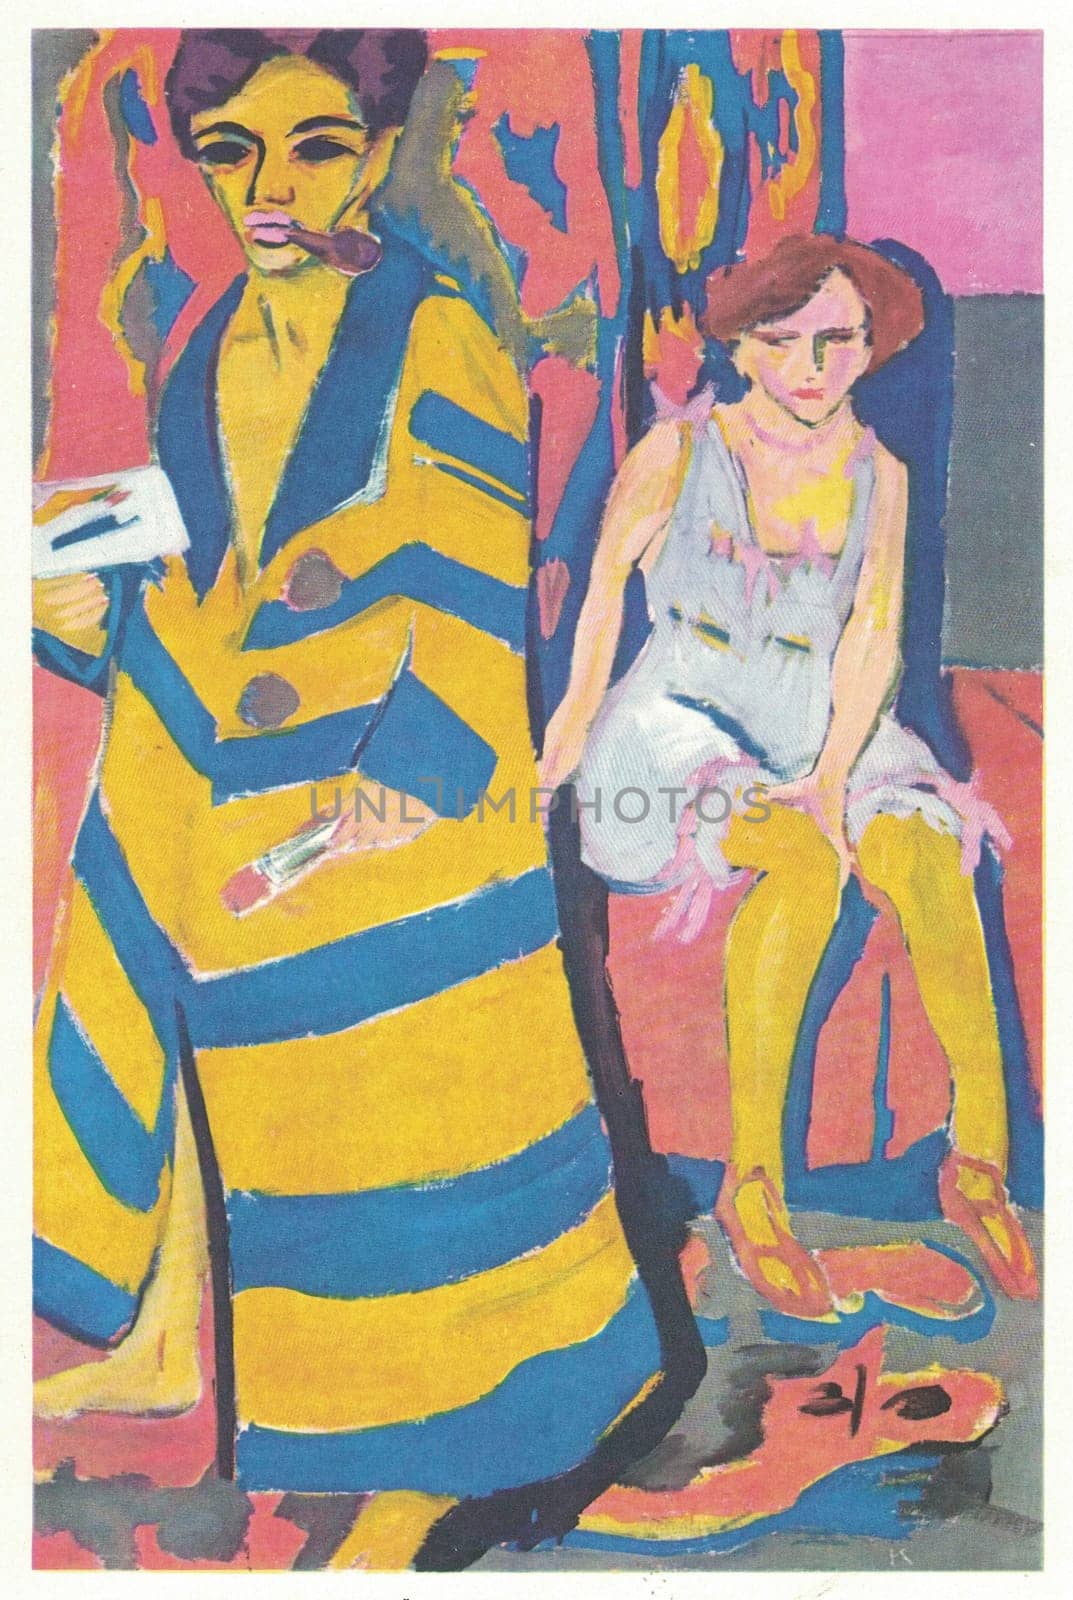 Self-Portrait With Model (1910) by Ernst Ludwig Kirchner. by roman_nerud